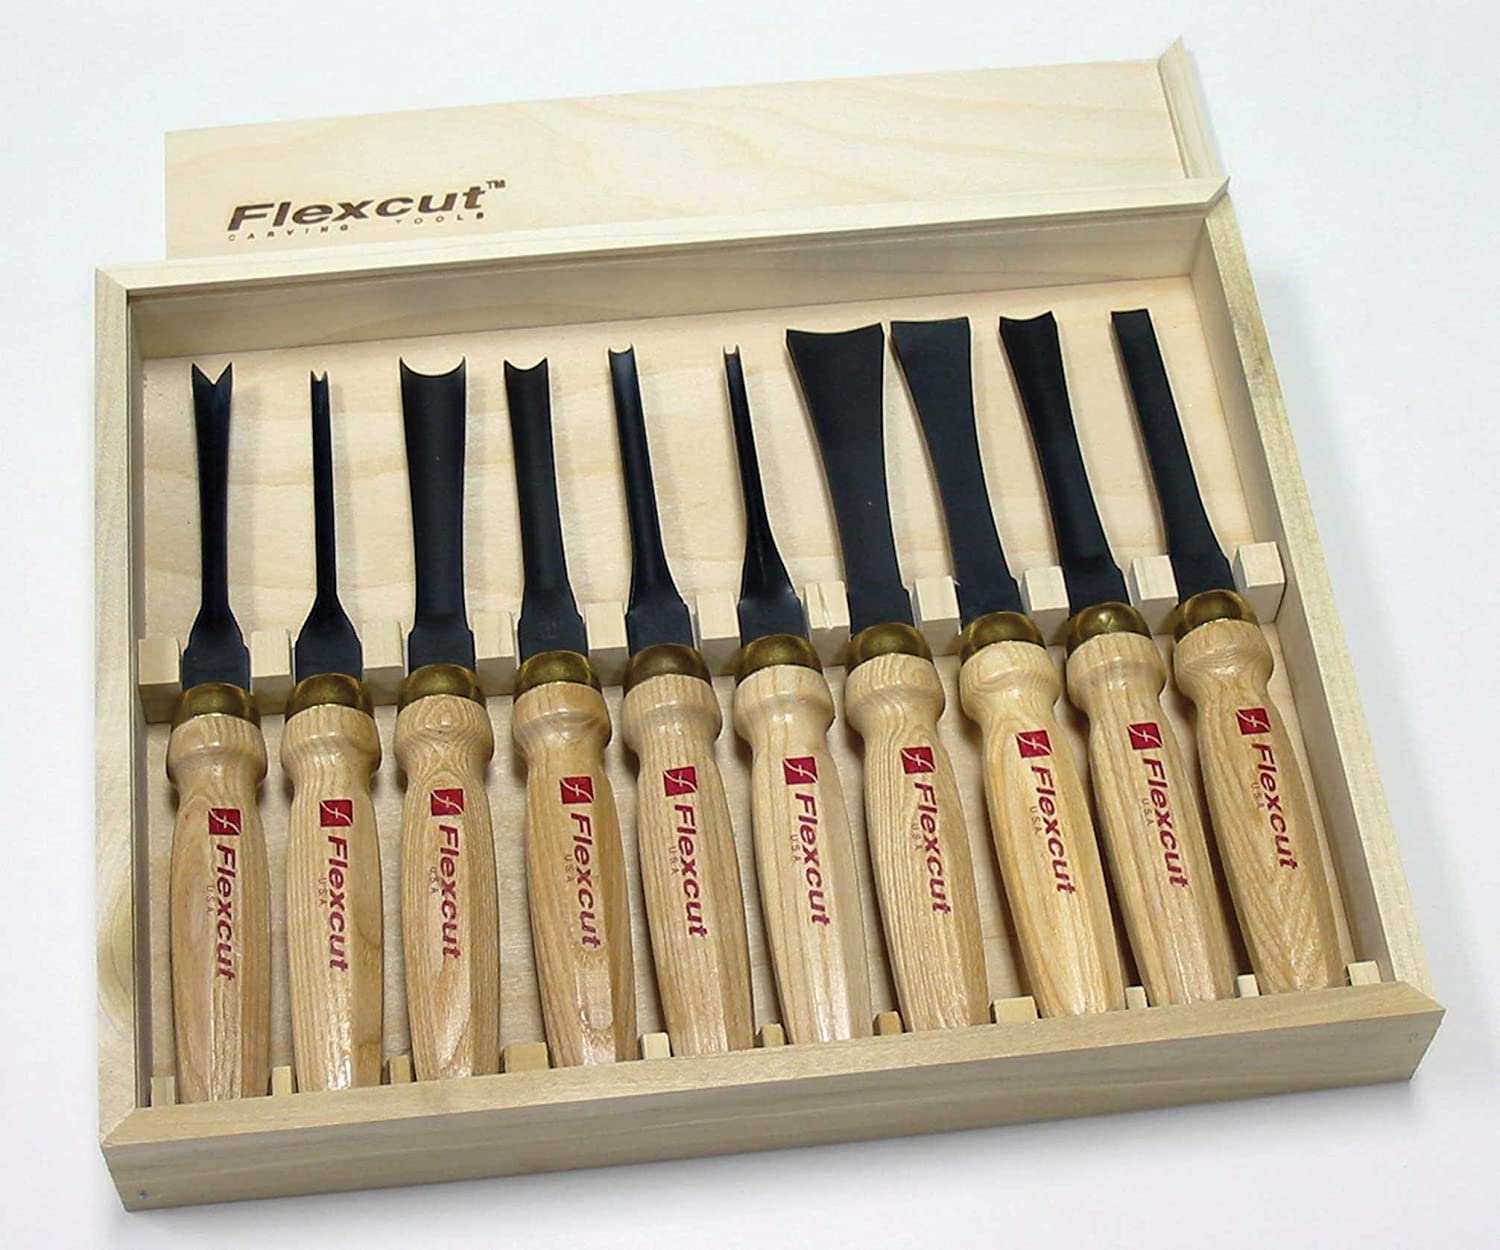 Buy Chiyuehe Professional Wood Carving Chisel Set 12 Piece Sharp Woodworking Tools W Carrying Case Great For Beginners Online In Taiwan B07bty38qz